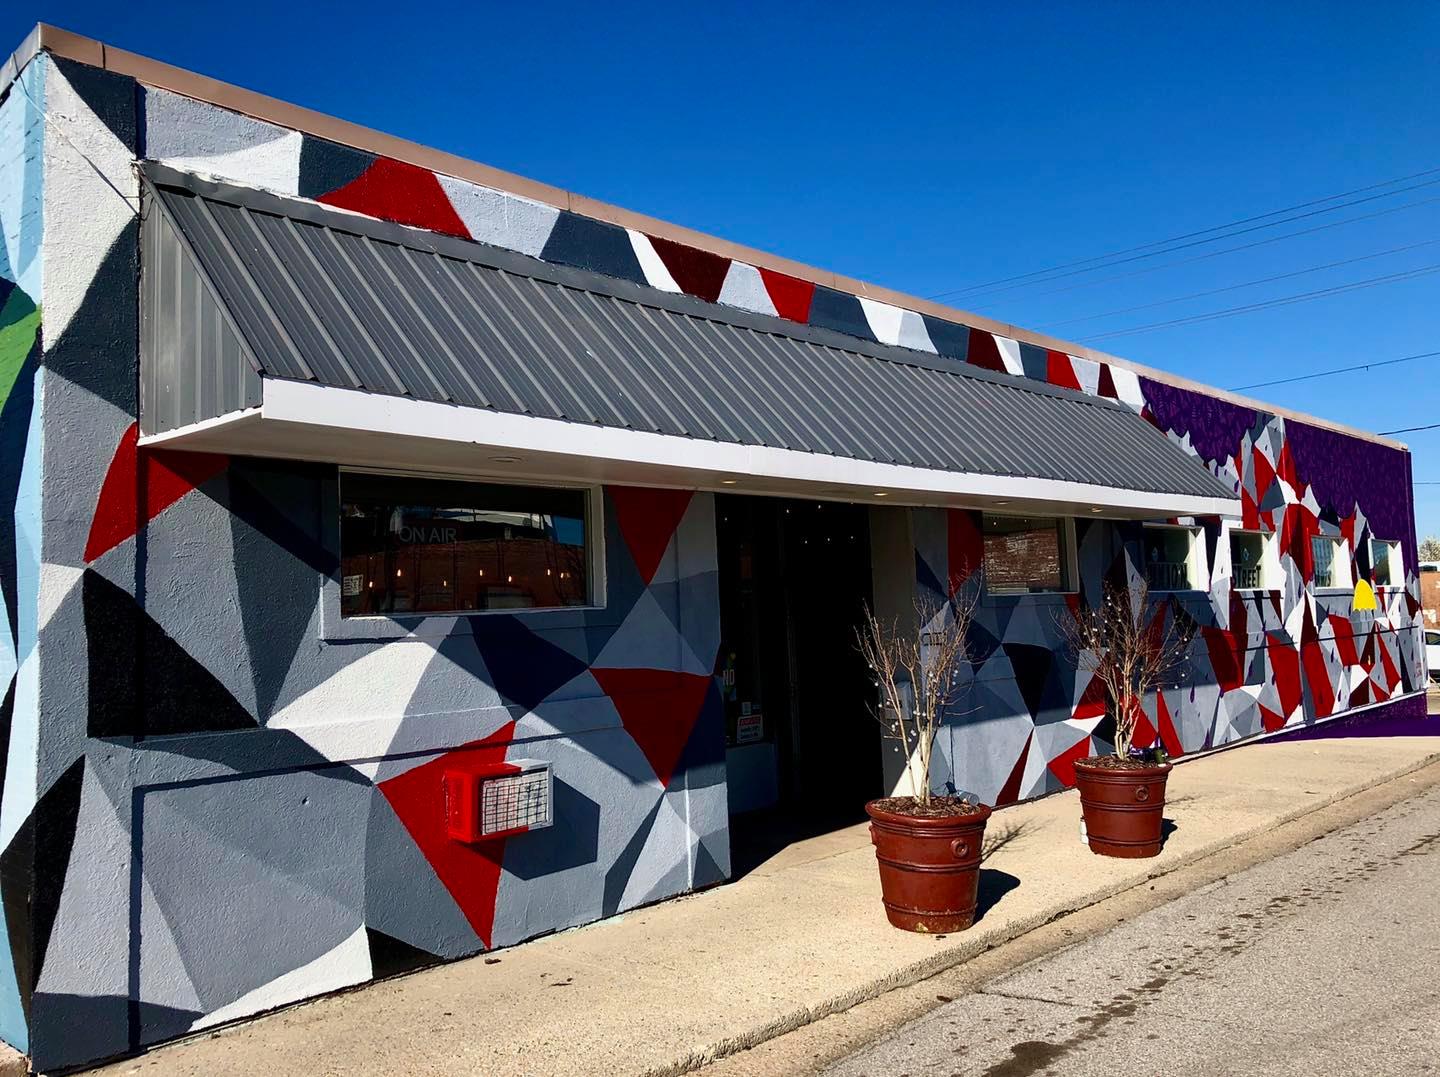 mural of geometric patttern on the front of the union streets arts building